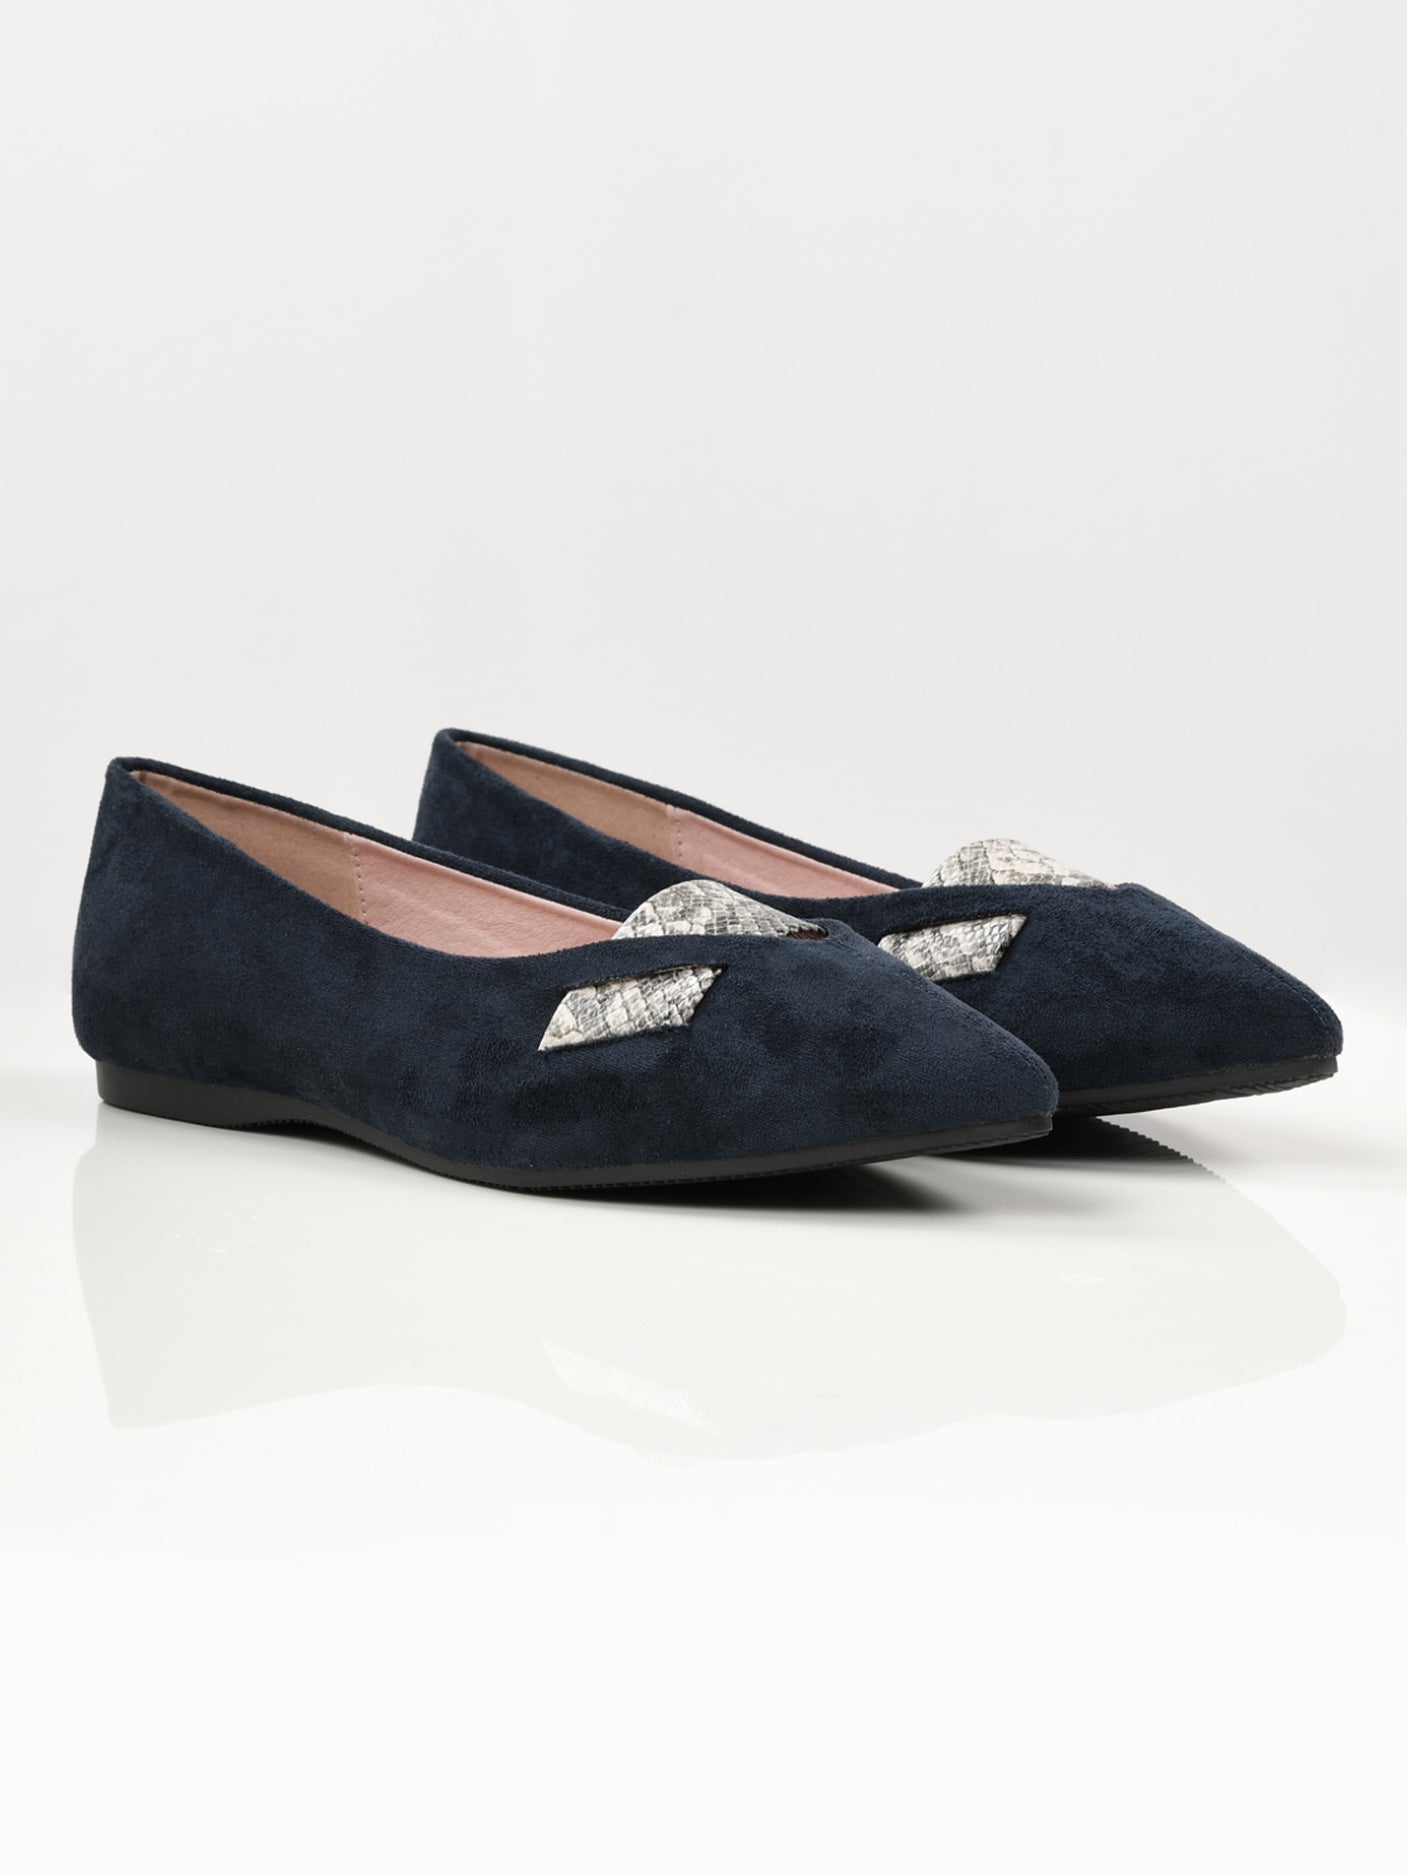 Printed Stripe Shoes - Navy Blue